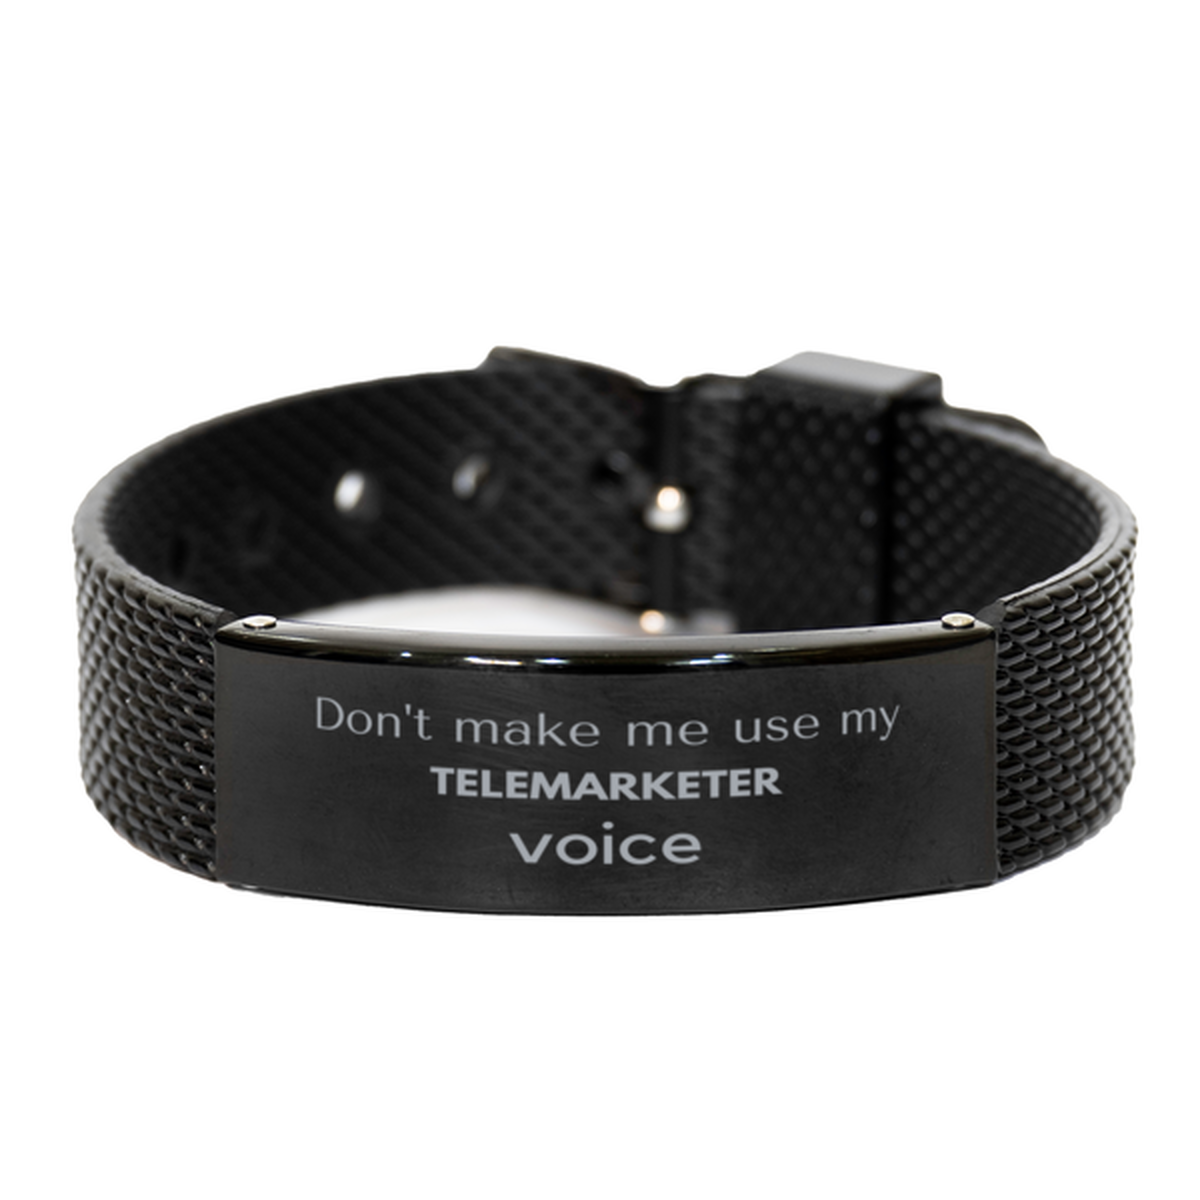 Don't make me use my Telemarketer voice, Sarcasm Telemarketer Gifts, Christmas Telemarketer Black Shark Mesh Bracelet Birthday Unique Gifts For Telemarketer Coworkers, Men, Women, Colleague, Friends